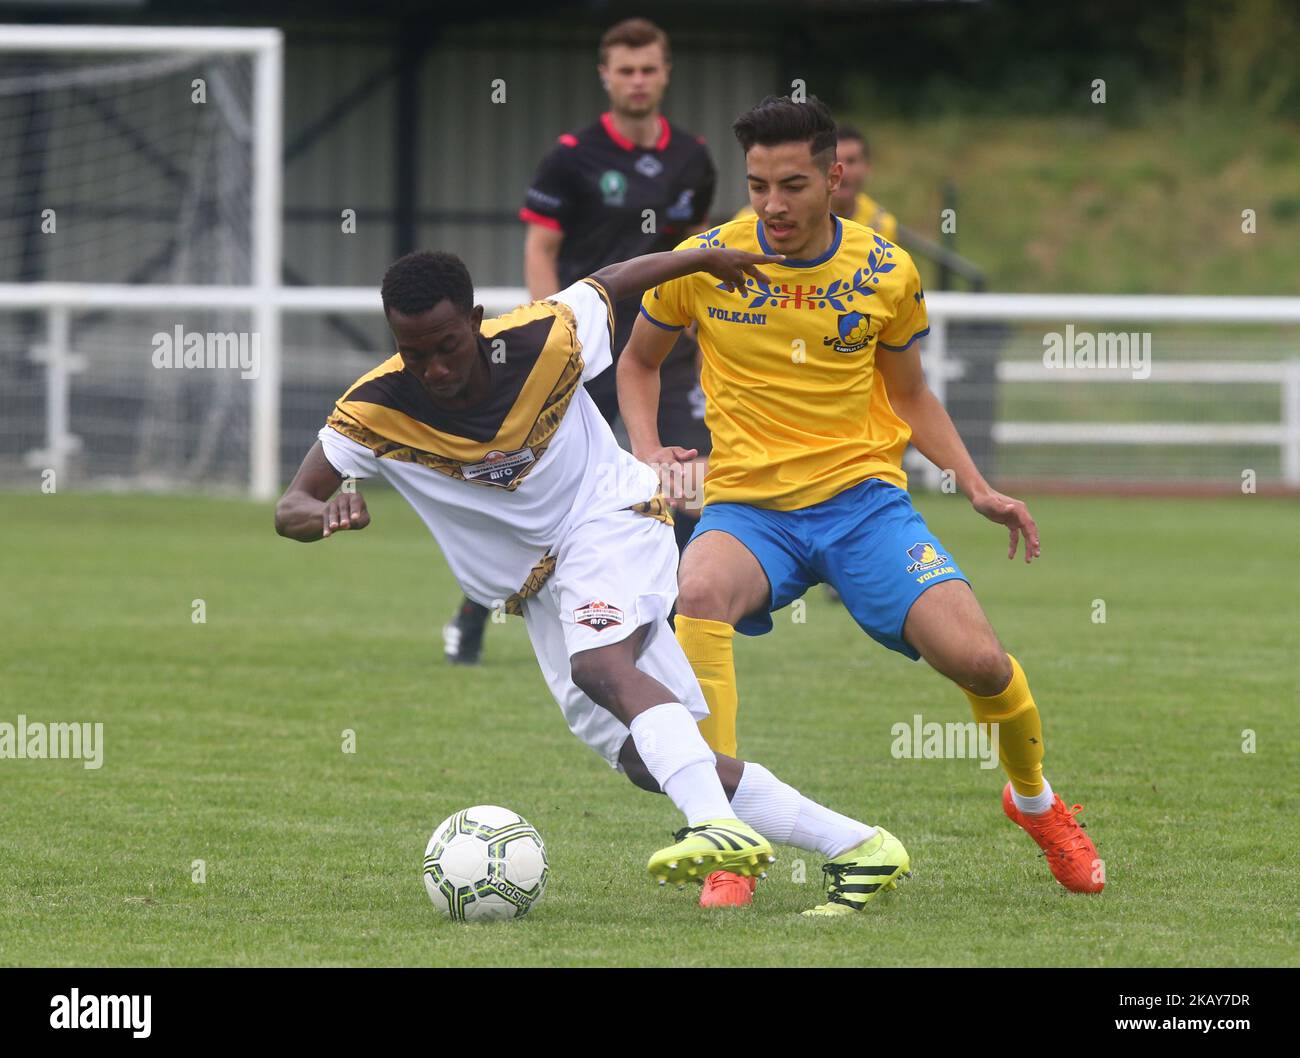 Romeo Sibanda of Mtabeleland during Conifa Paddy Power World Football Cup 2018 Quarterfinal B for Places 9-16 match between Matabeleland against Kabylia at Queen Elizabeth II Stadium (Enfield Town FC), London, on 05 June 2018 (Photo by Kieran Galvin/NurPhoto) Stock Photo